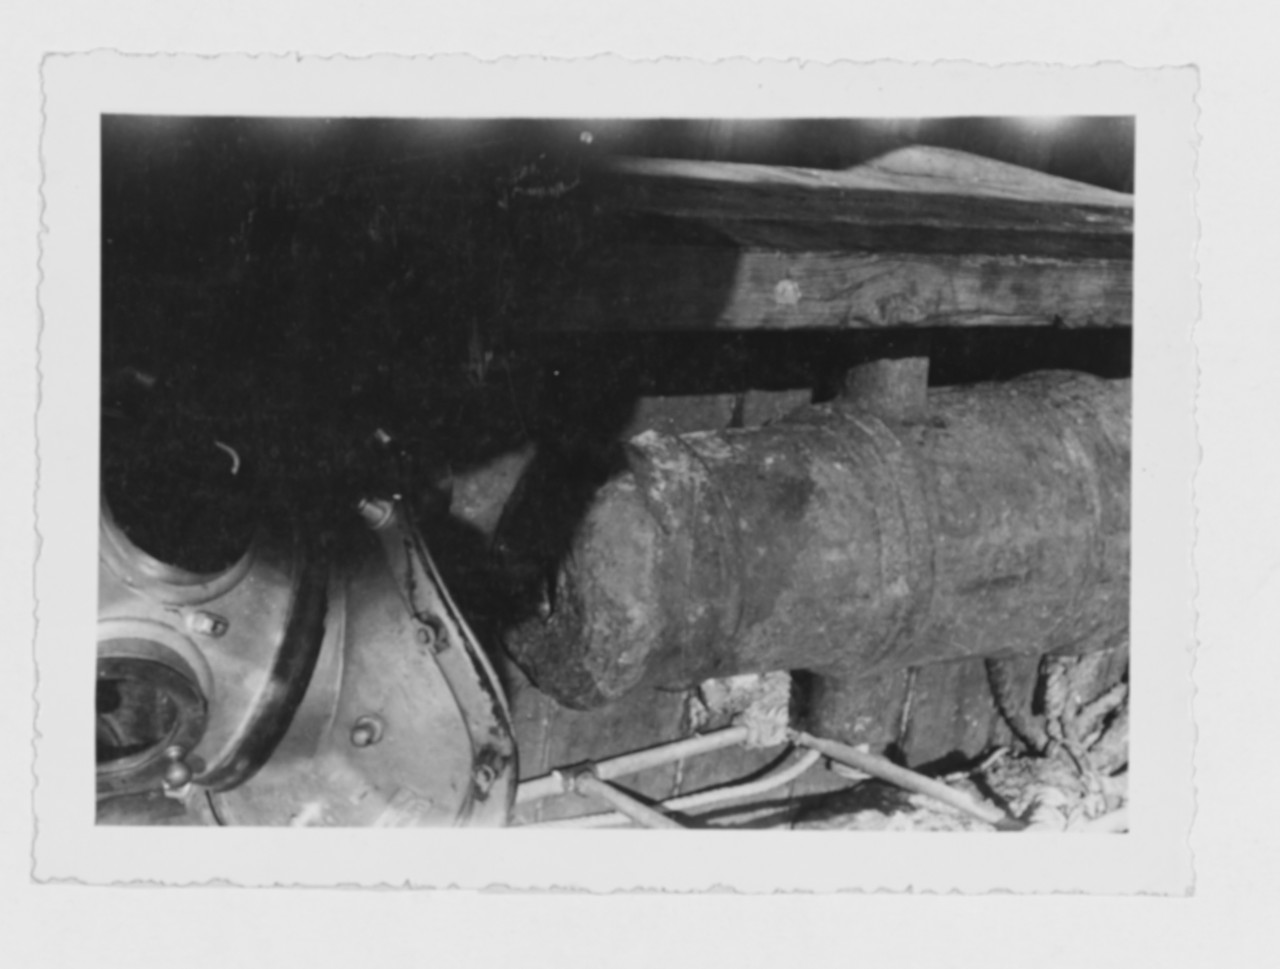 Salvaged Gun and Diving Helmet During Salvage Mission South of Cuba